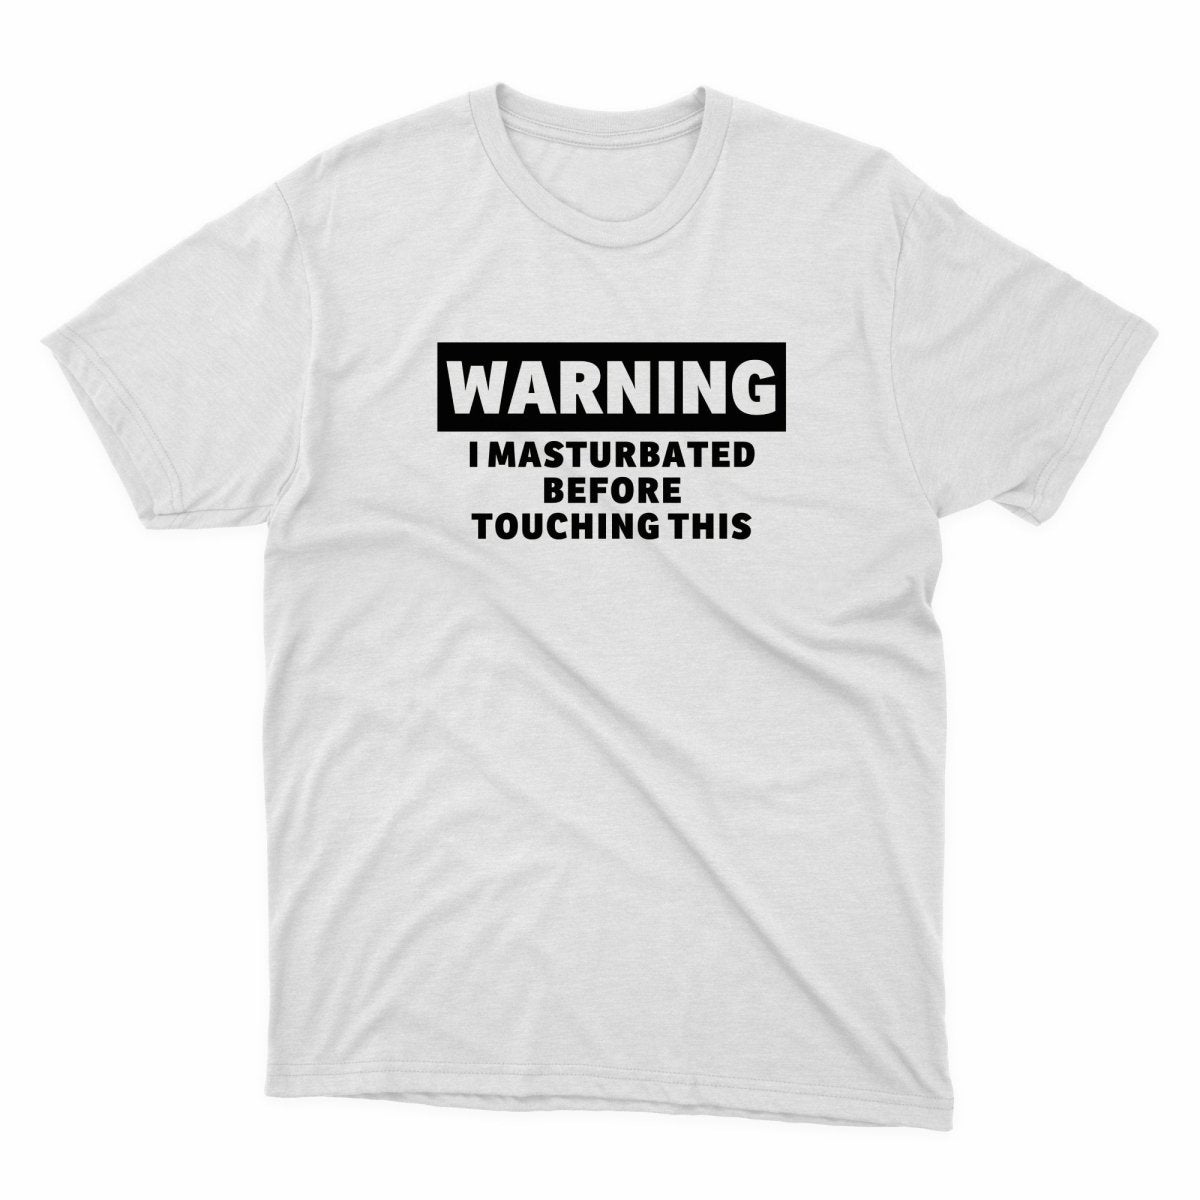 Warning I Masturbated Before Touching This Shirt - stickerbullWarning I Masturbated Before Touching This ShirtShirtsPrintifystickerbull29731401058127095993WhiteSa white t - shirt with the words warning i masttured and touching this